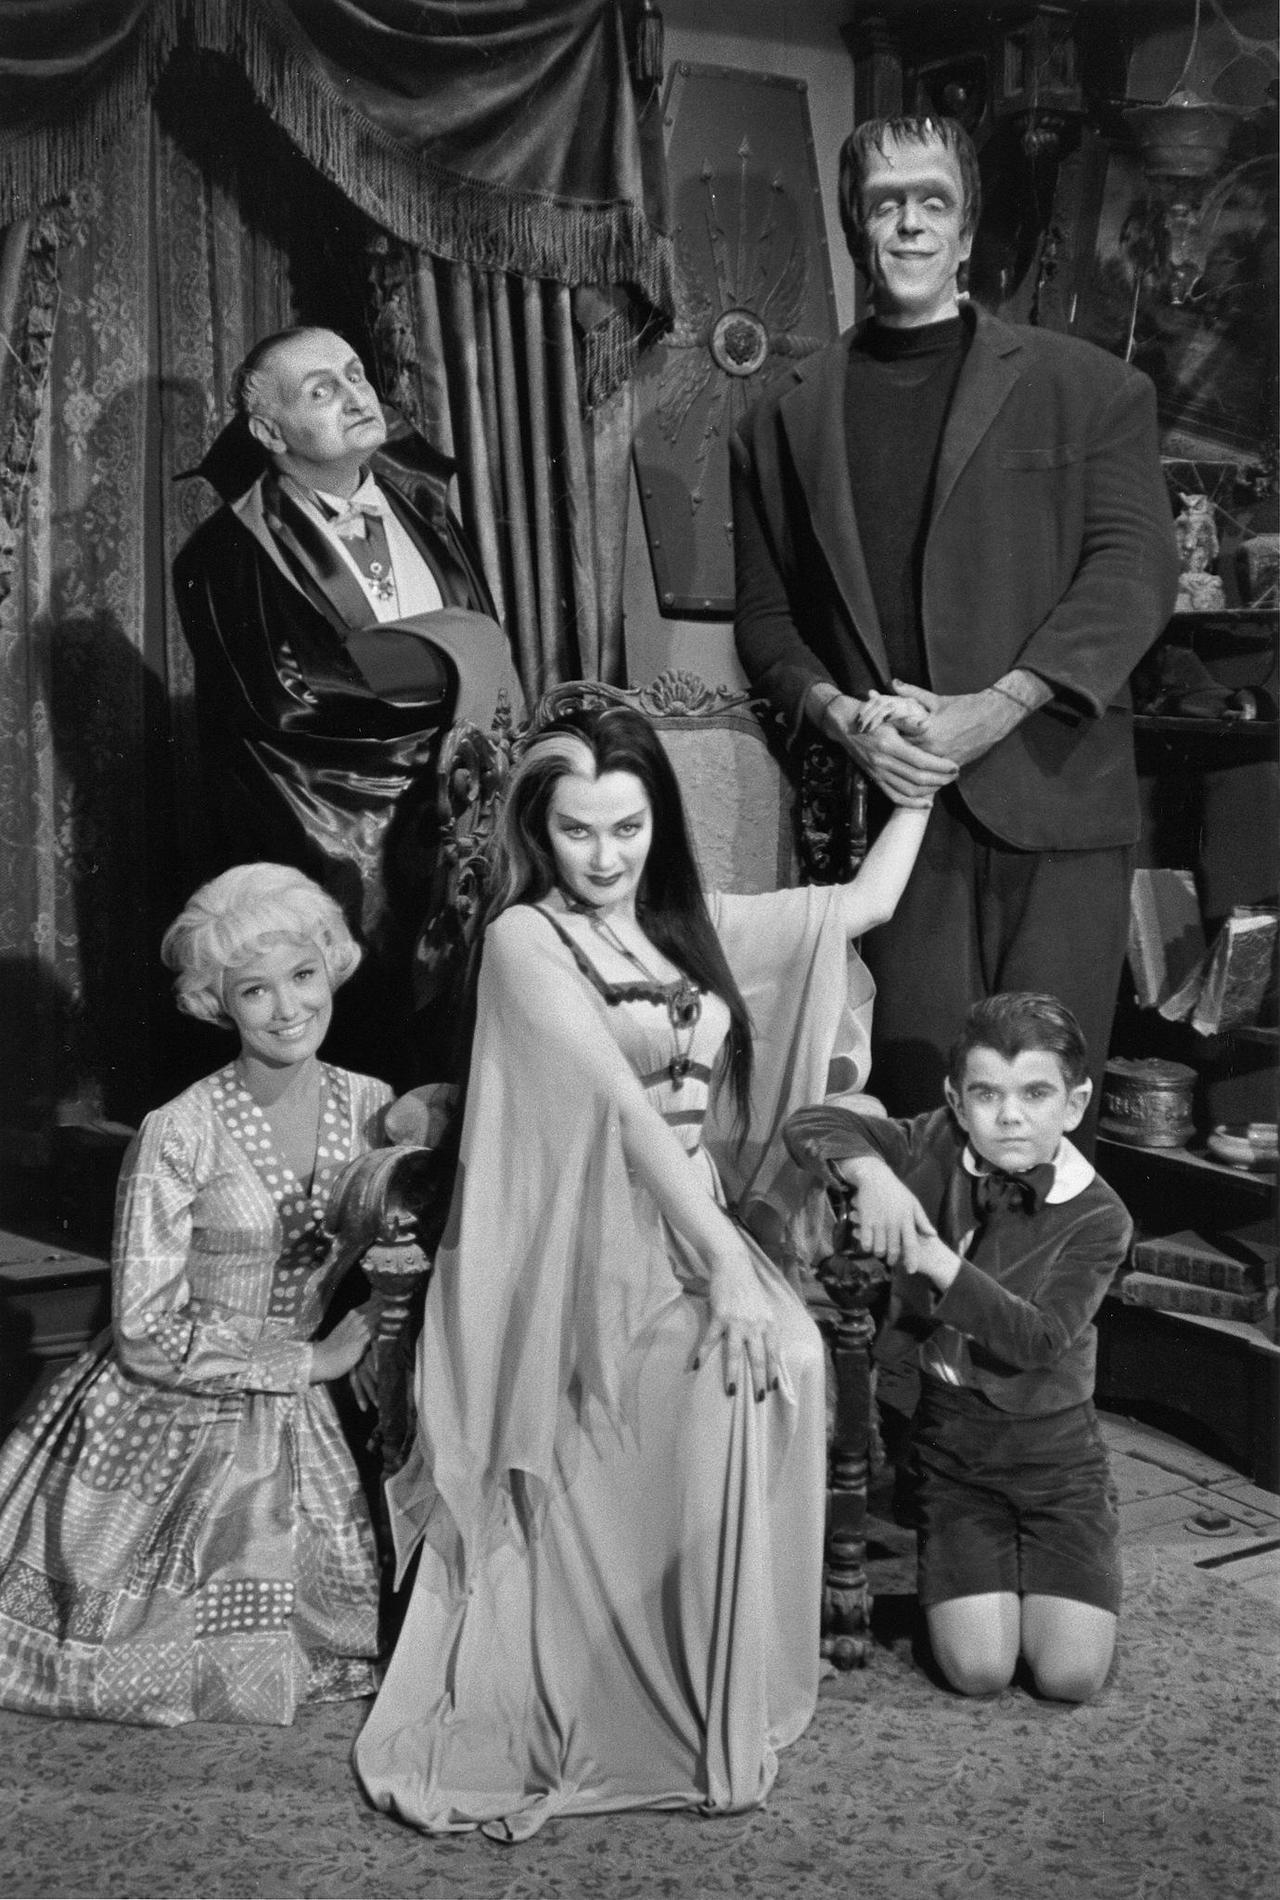 The Munsters #6